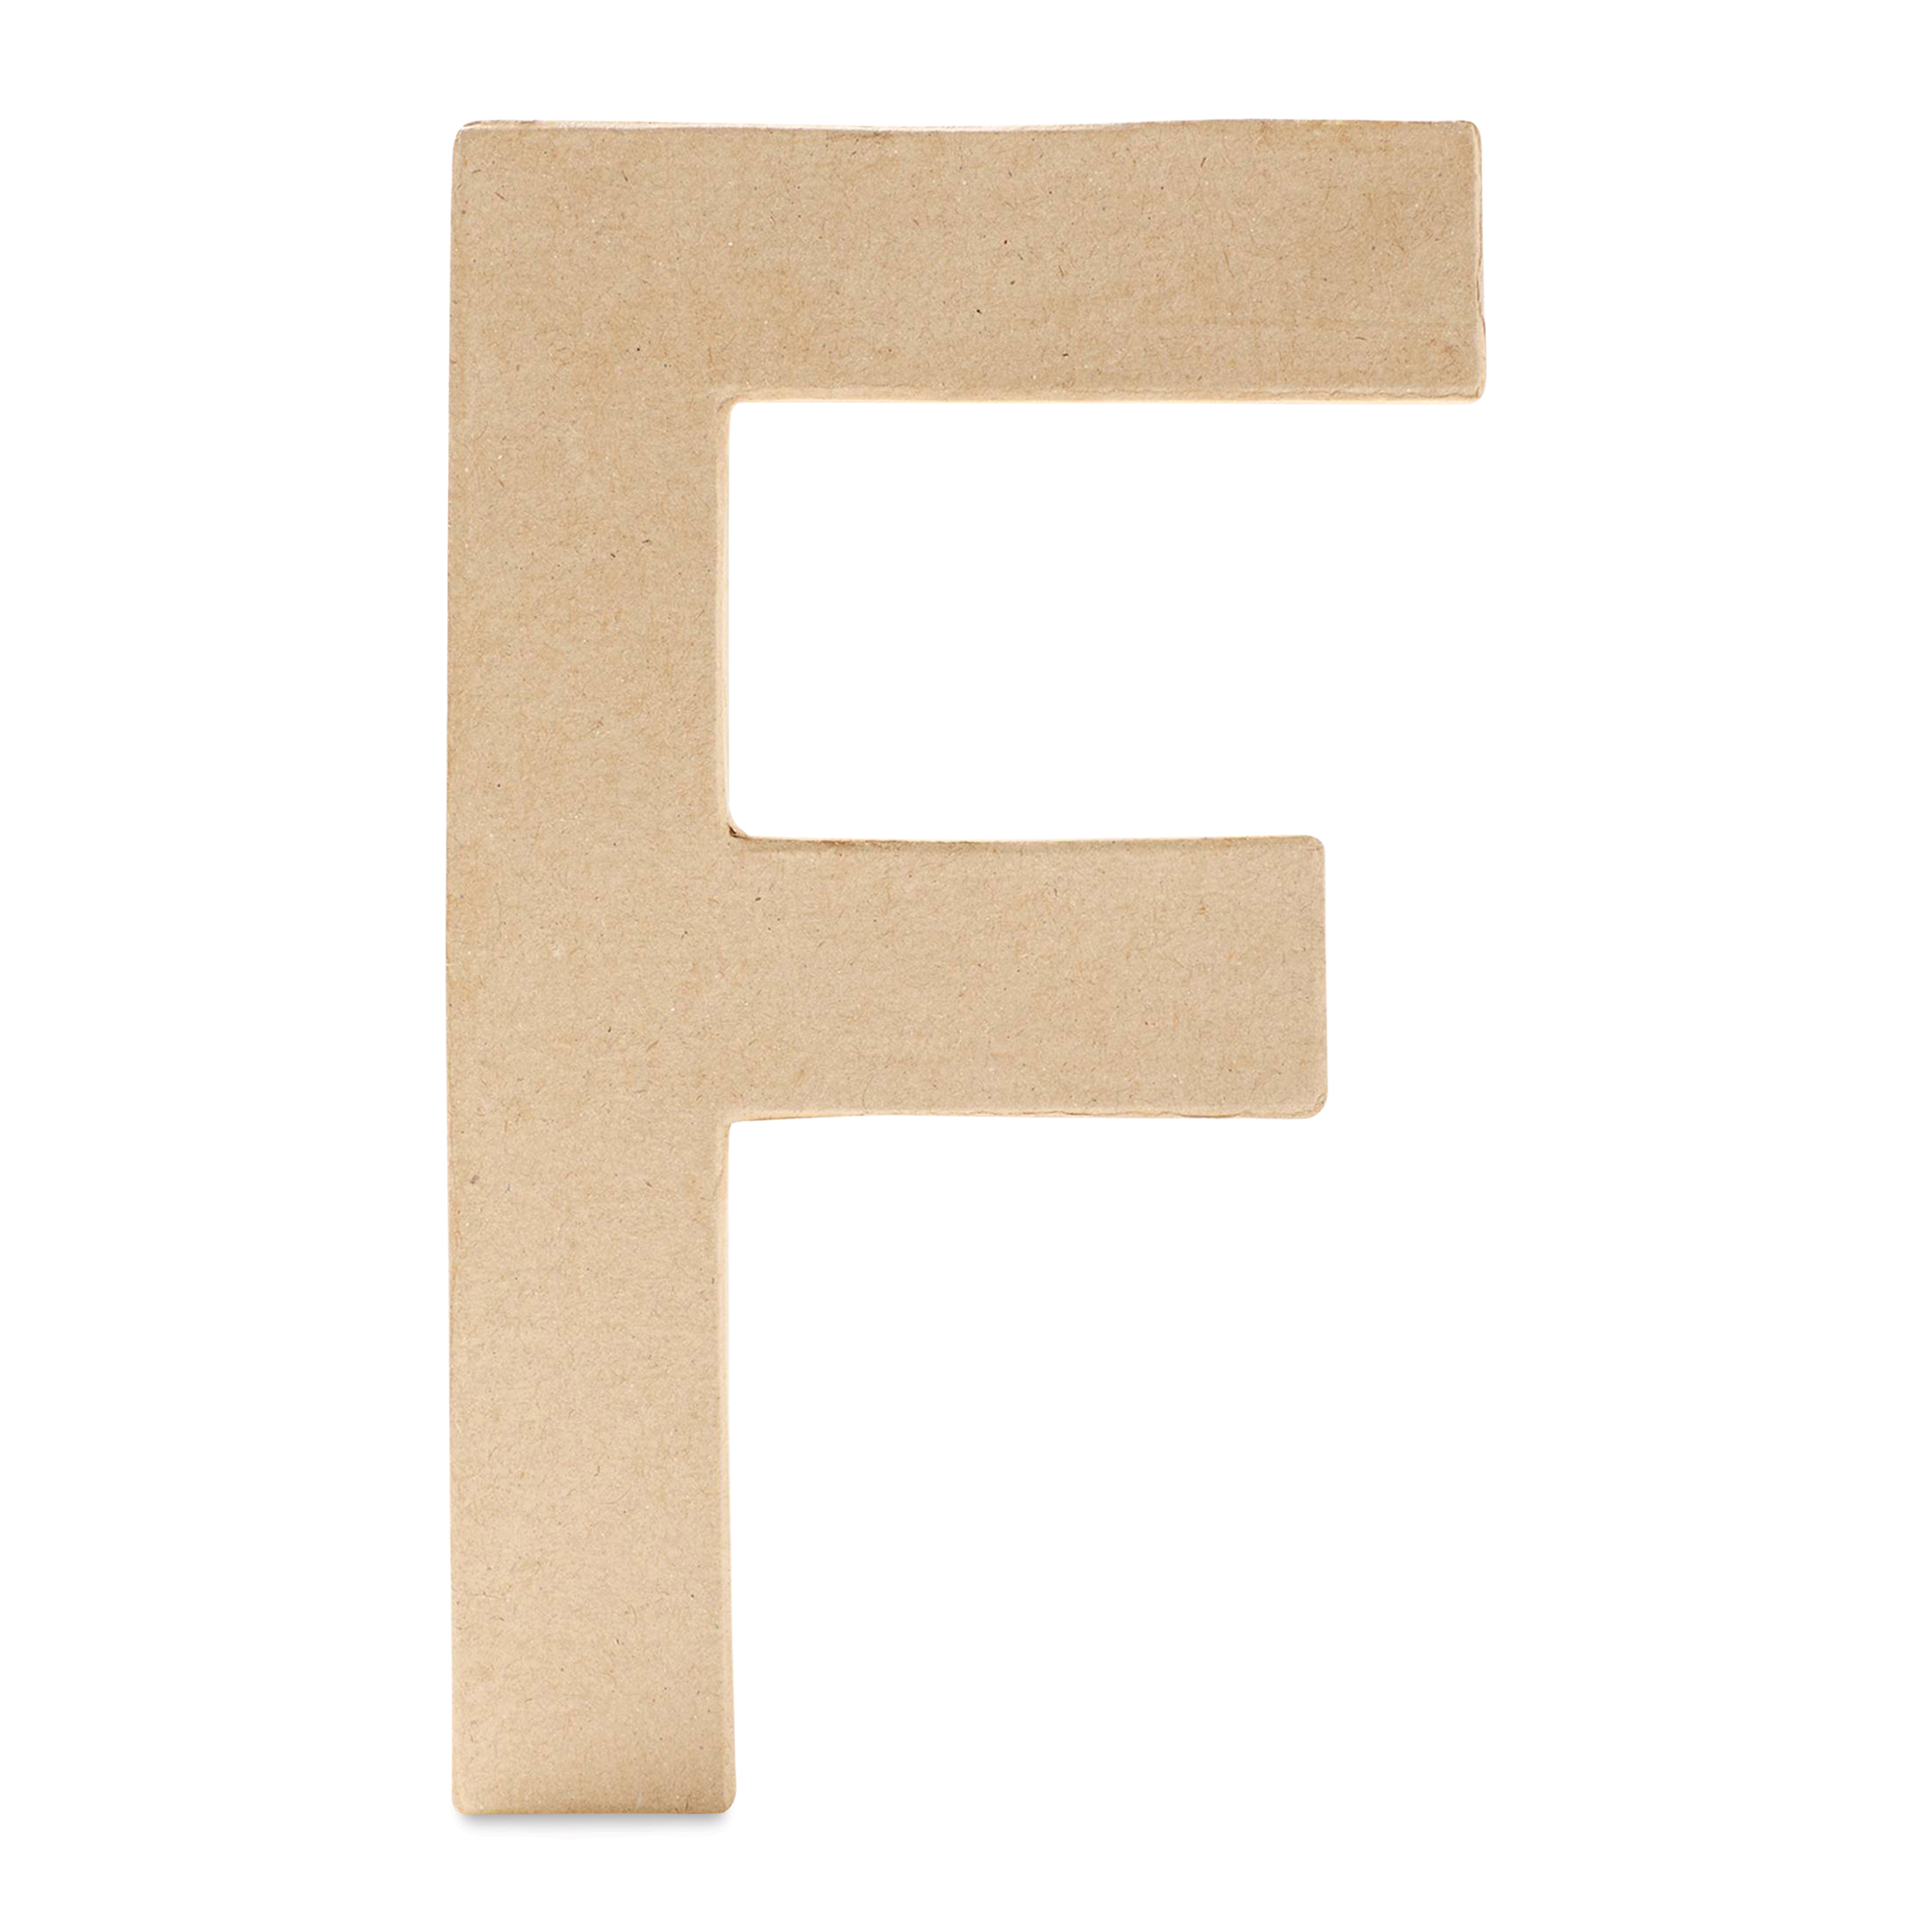 Park Lane 12in Paper Mache Letters - Ampersand - Wooden Letters, Numbers & Words - Crafts & Hobbies